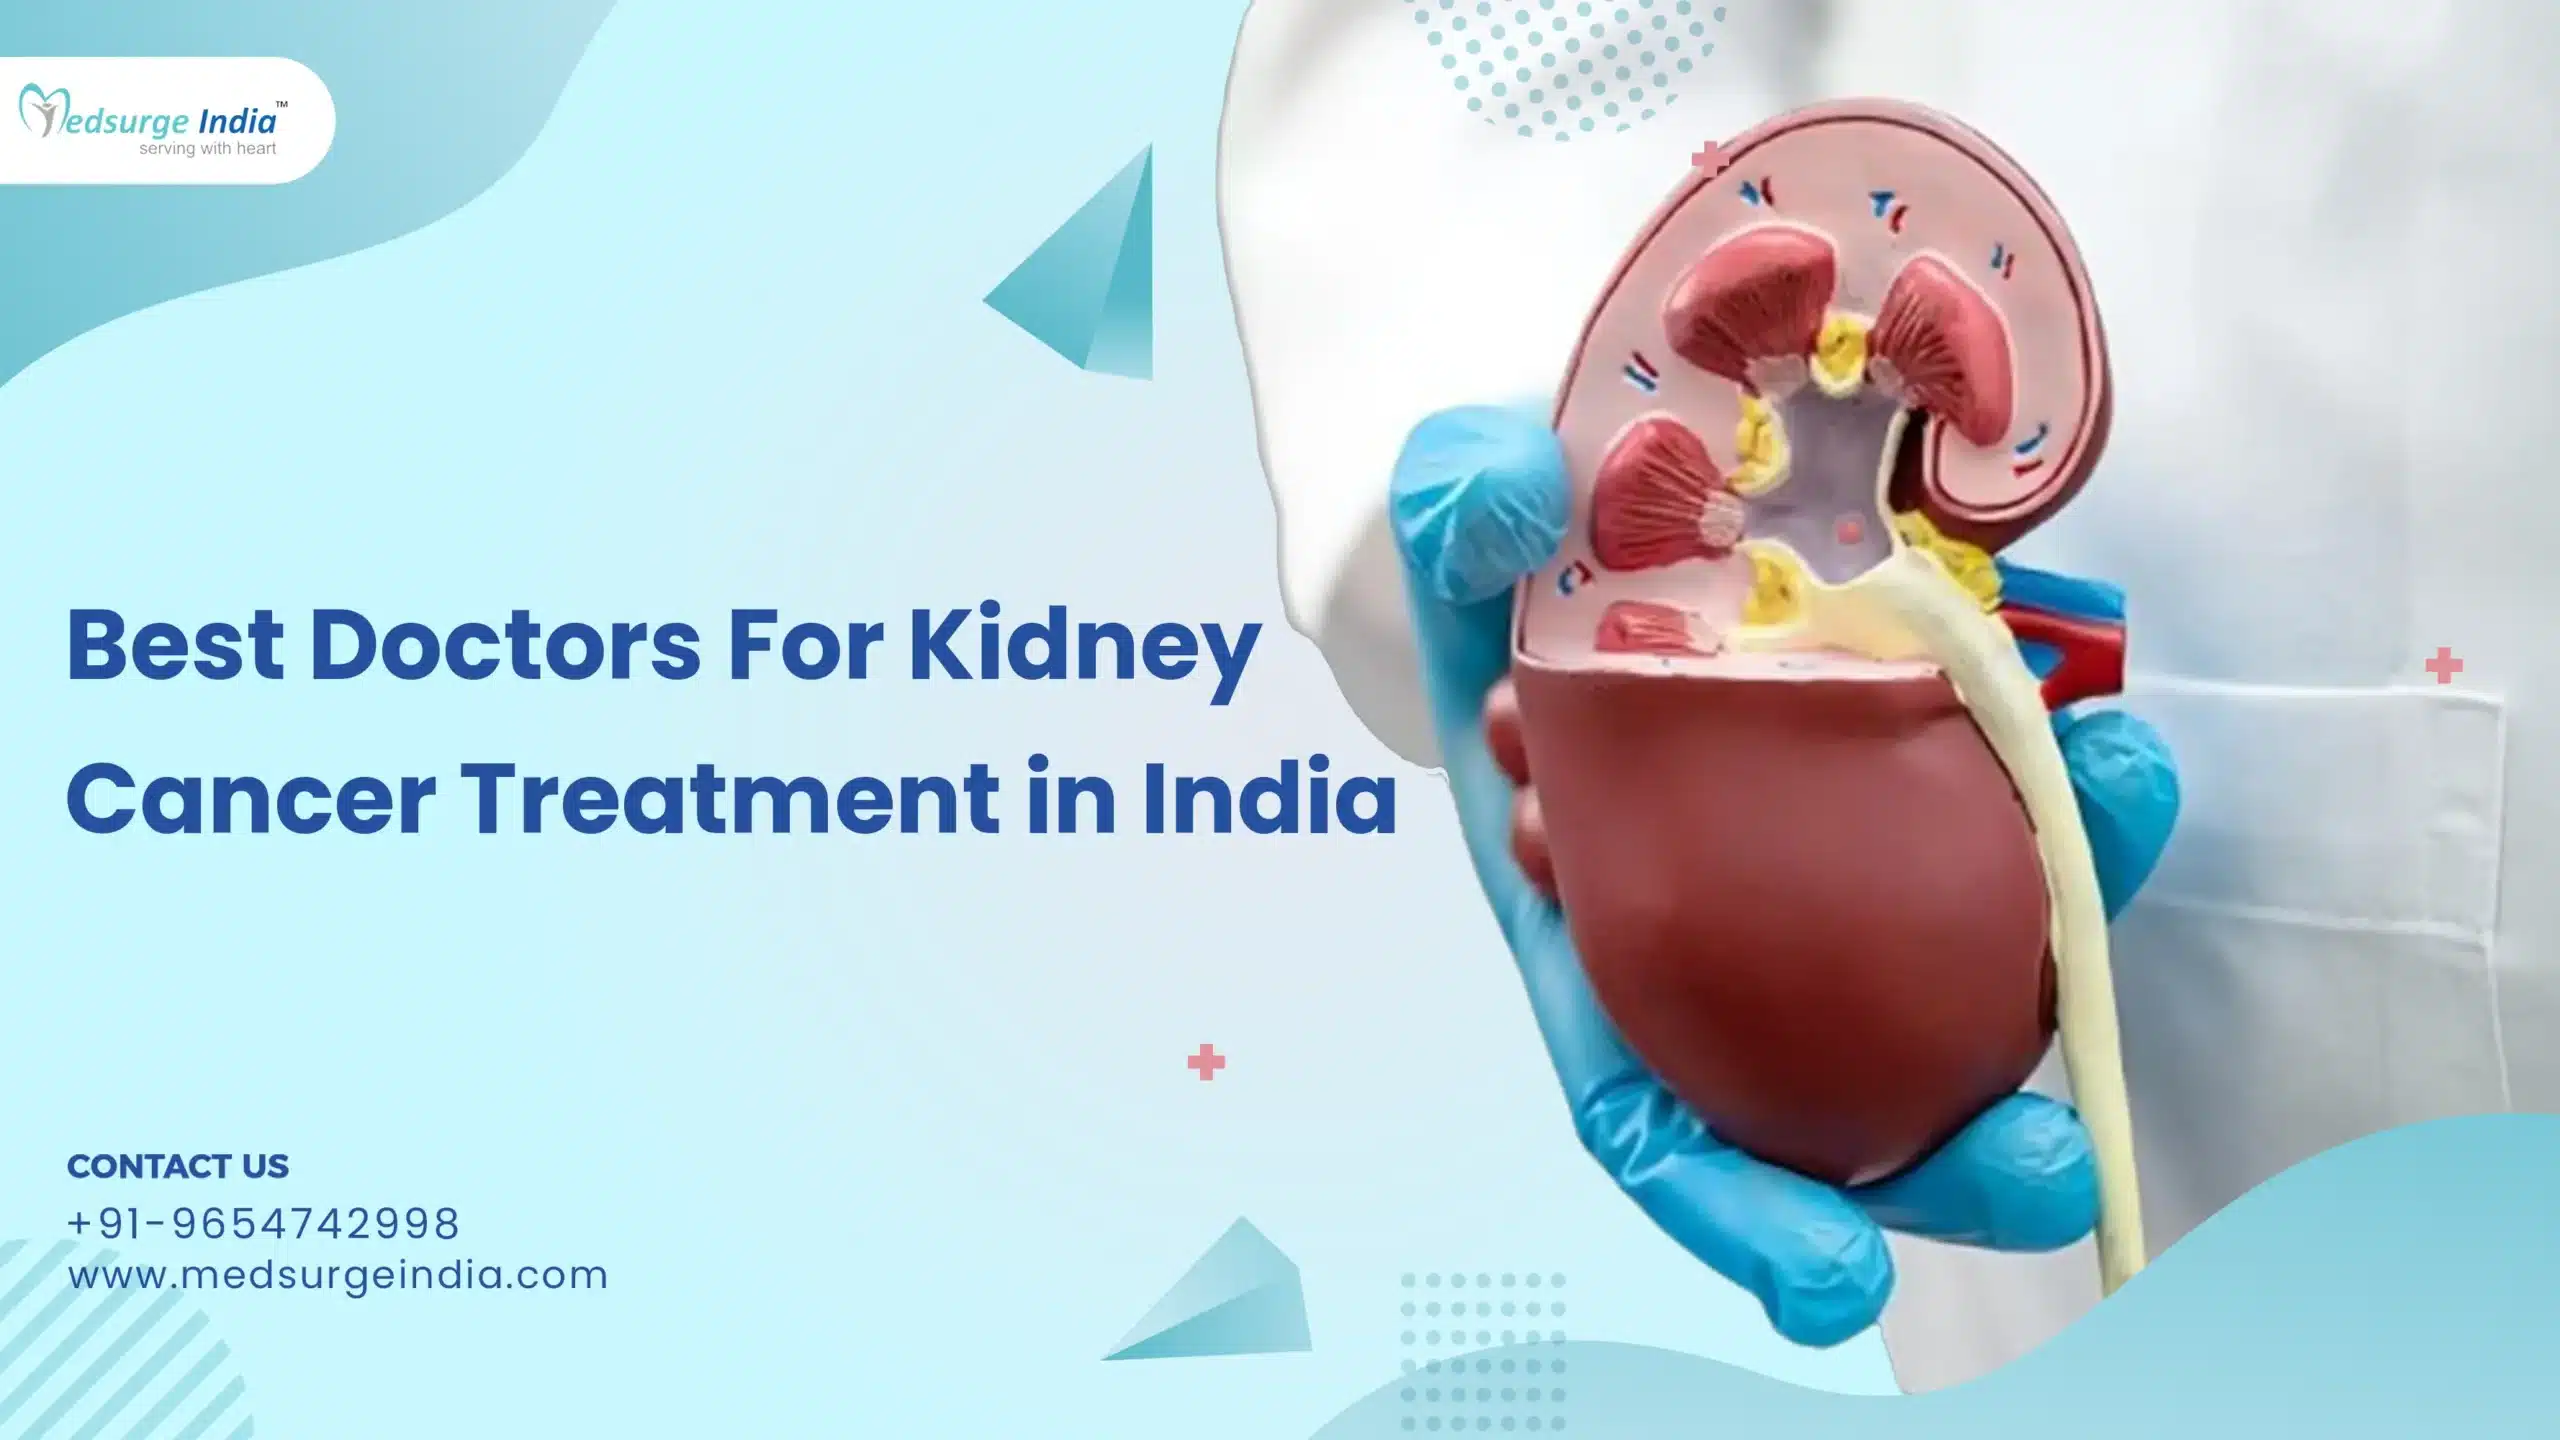 Best Doctors For Kidney Cancer Treatment in India